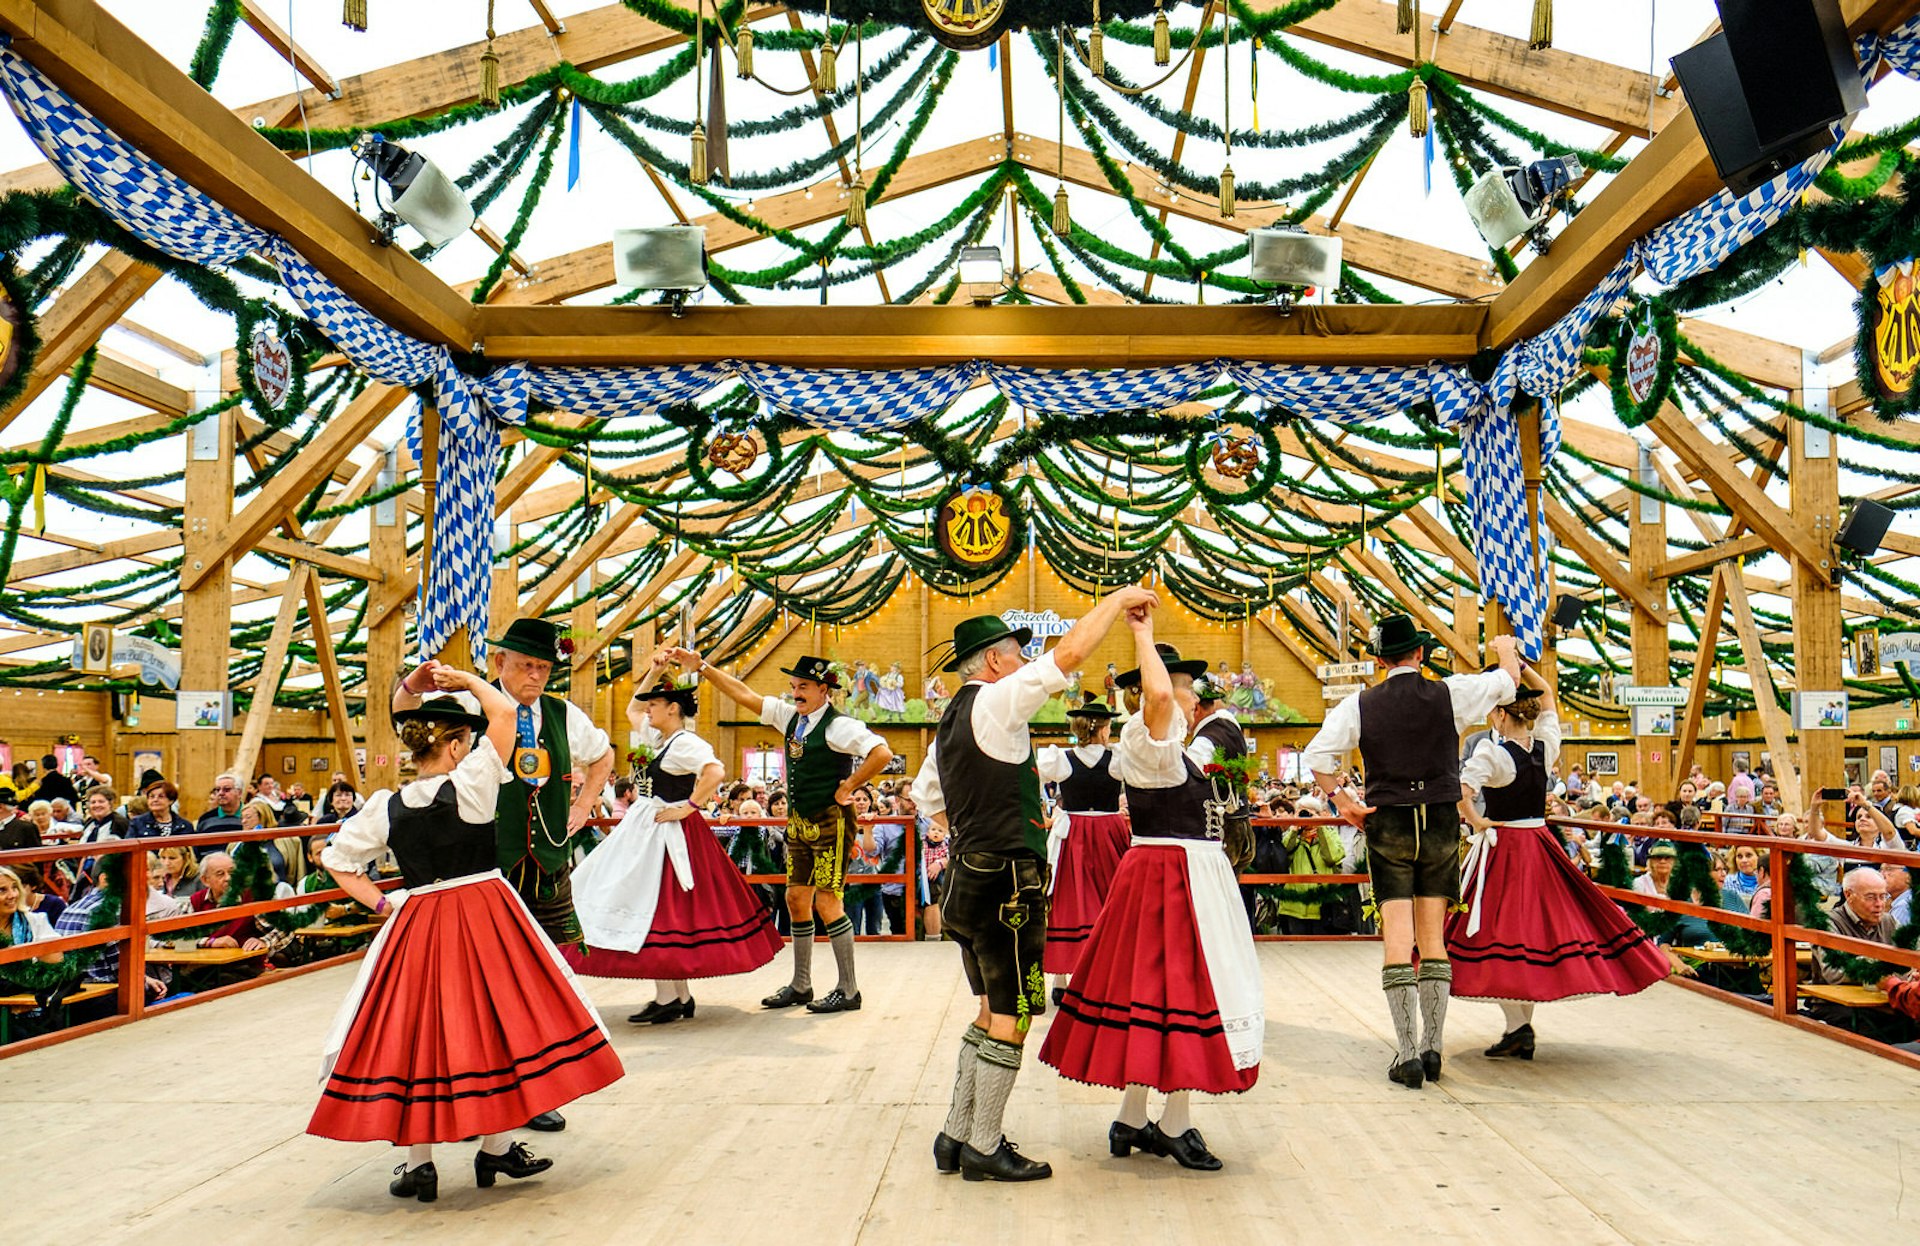 Couples dancing in traditional costumes inside a beer tent during Oktoberfest.